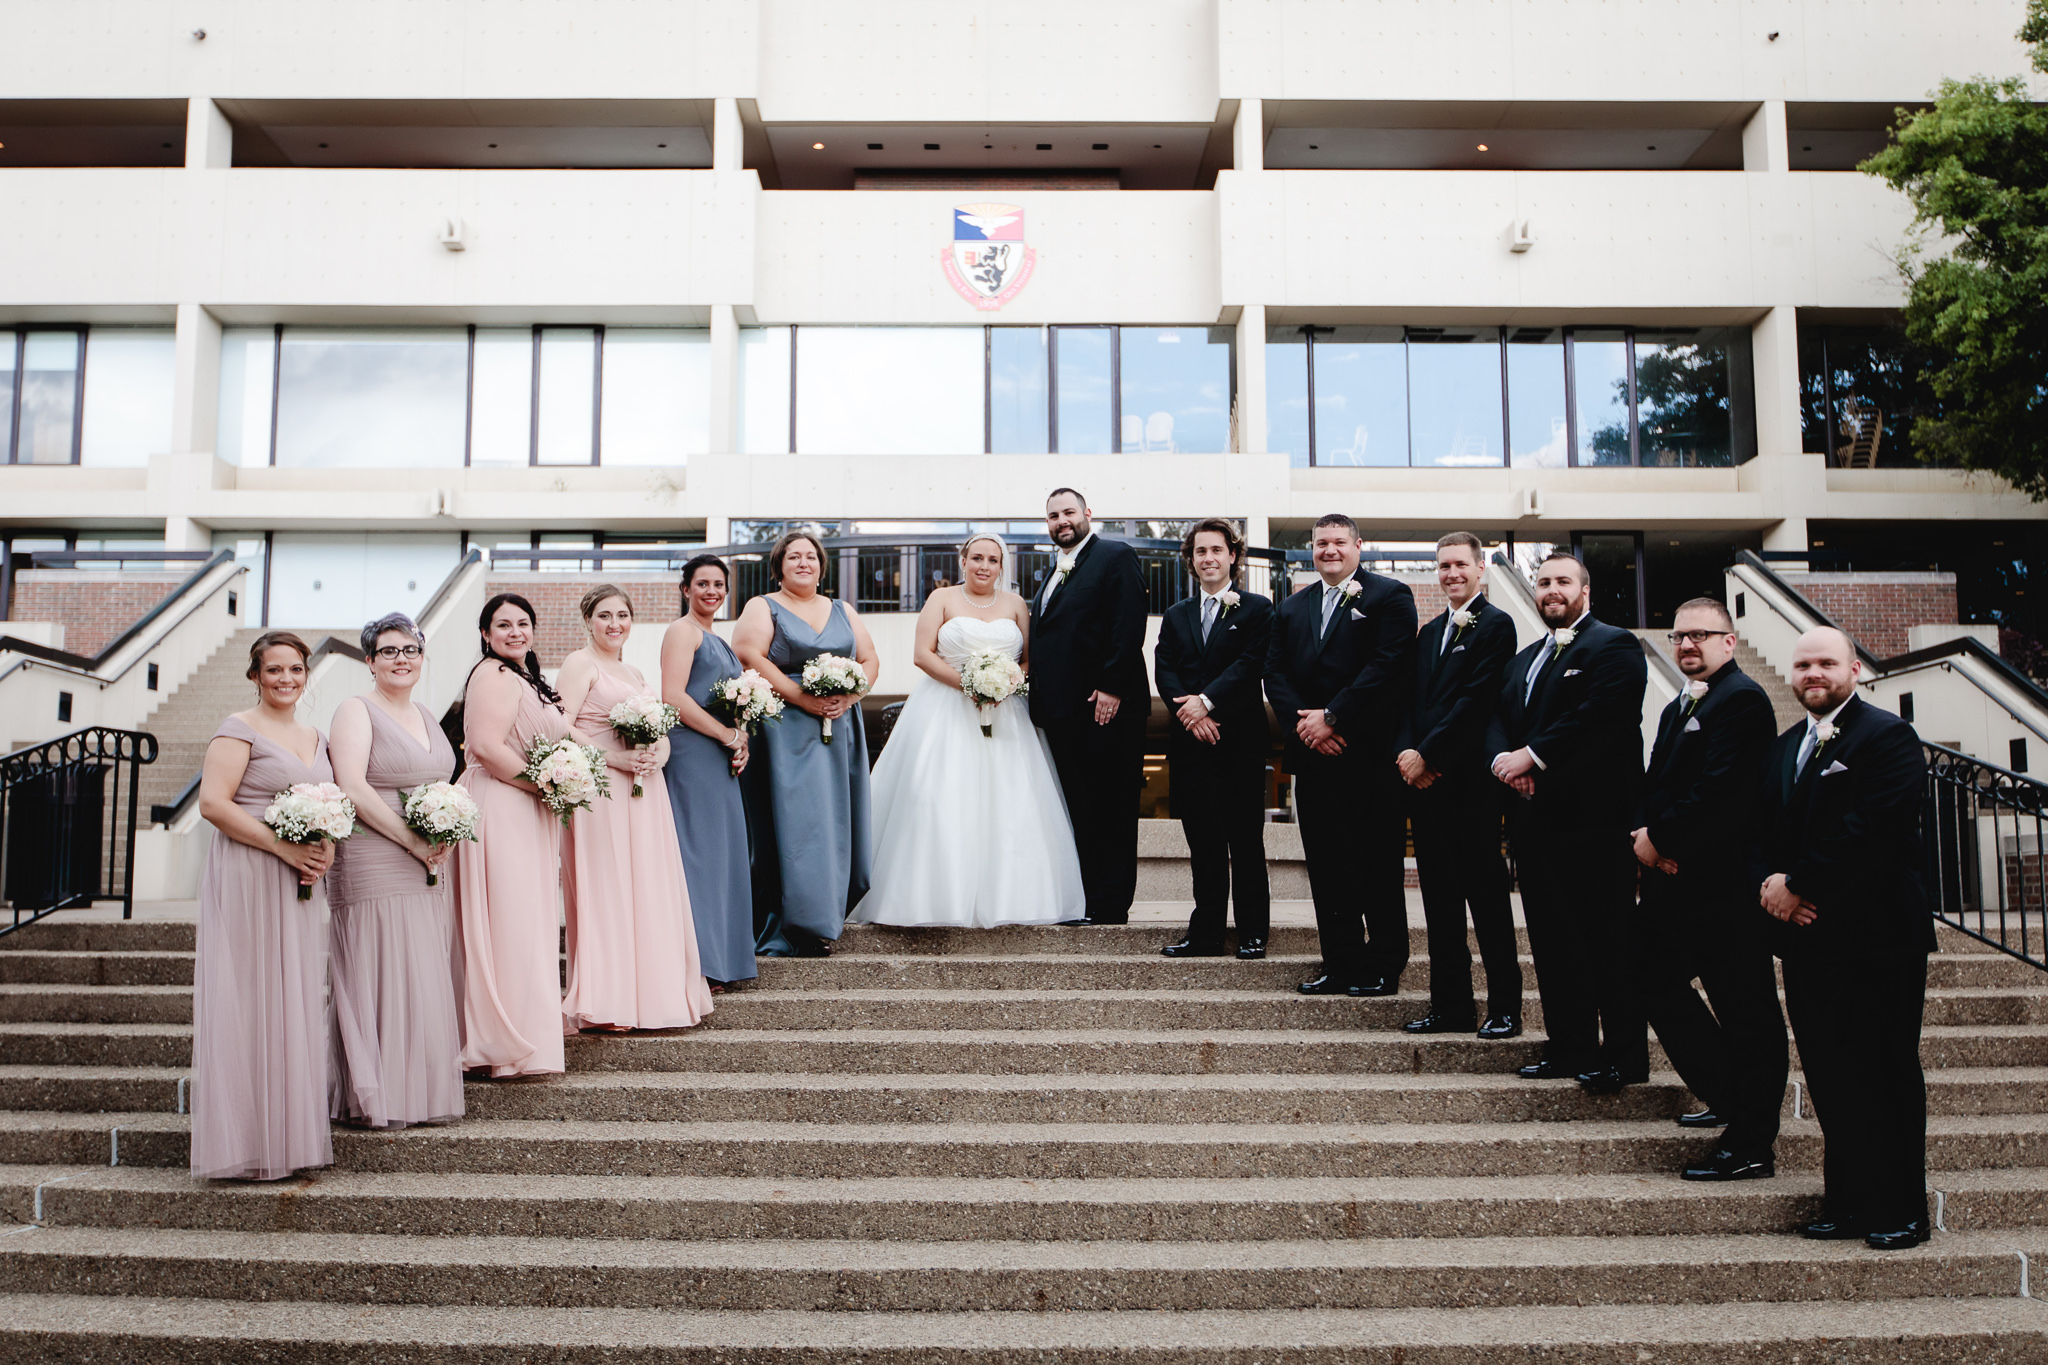 Bridal party poses on the steps of Duquesne University's student union